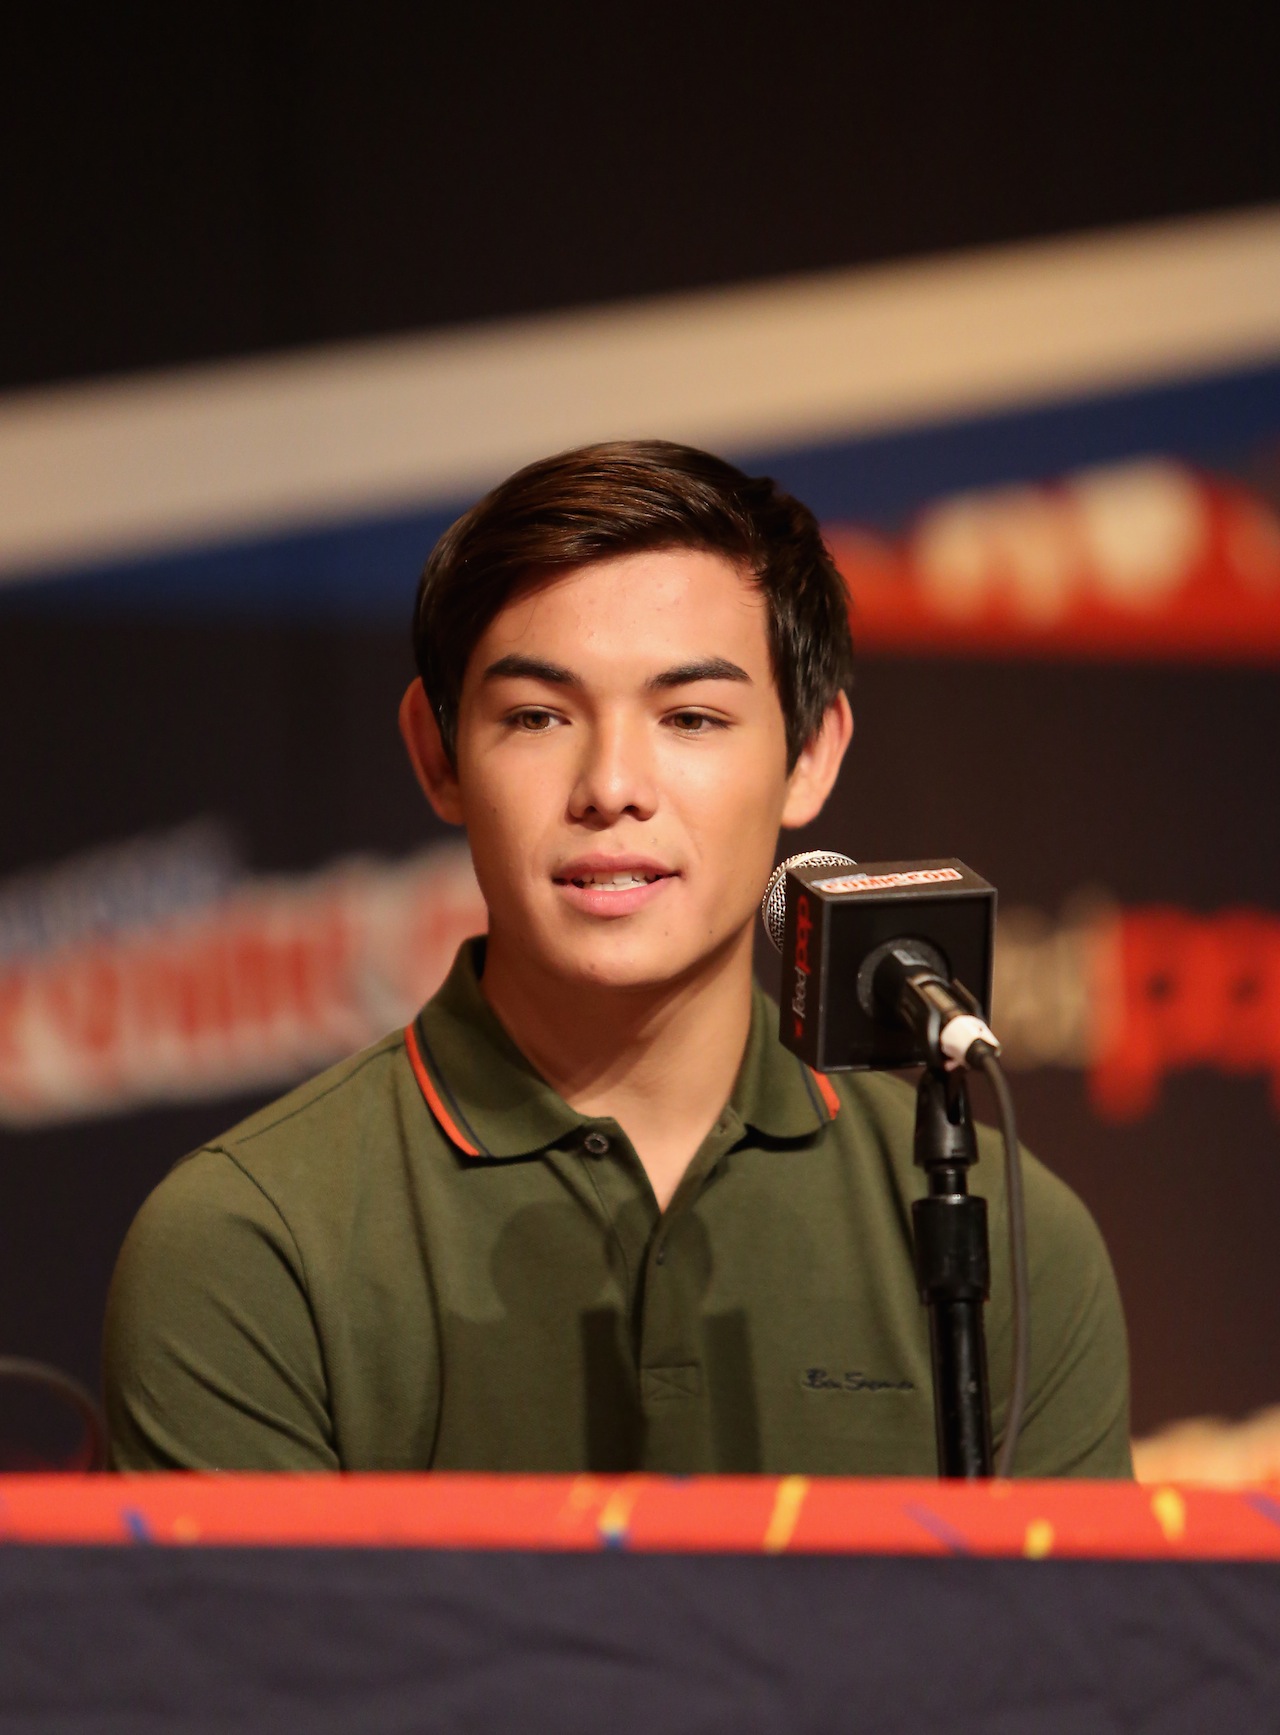 NEW YORK, NY - OCTOBER 09:  Actor Ryan Potter attends Walt Disney Studios' 2014 New York Comic Con presentation of "Big Hero 6" at the Javits Convention Center on Thursday October 9, 2014 in New York City.  (Photo by Jason Carter Rinaldi/Getty Images for Disney) *** Local Caption *** Ryan Potter